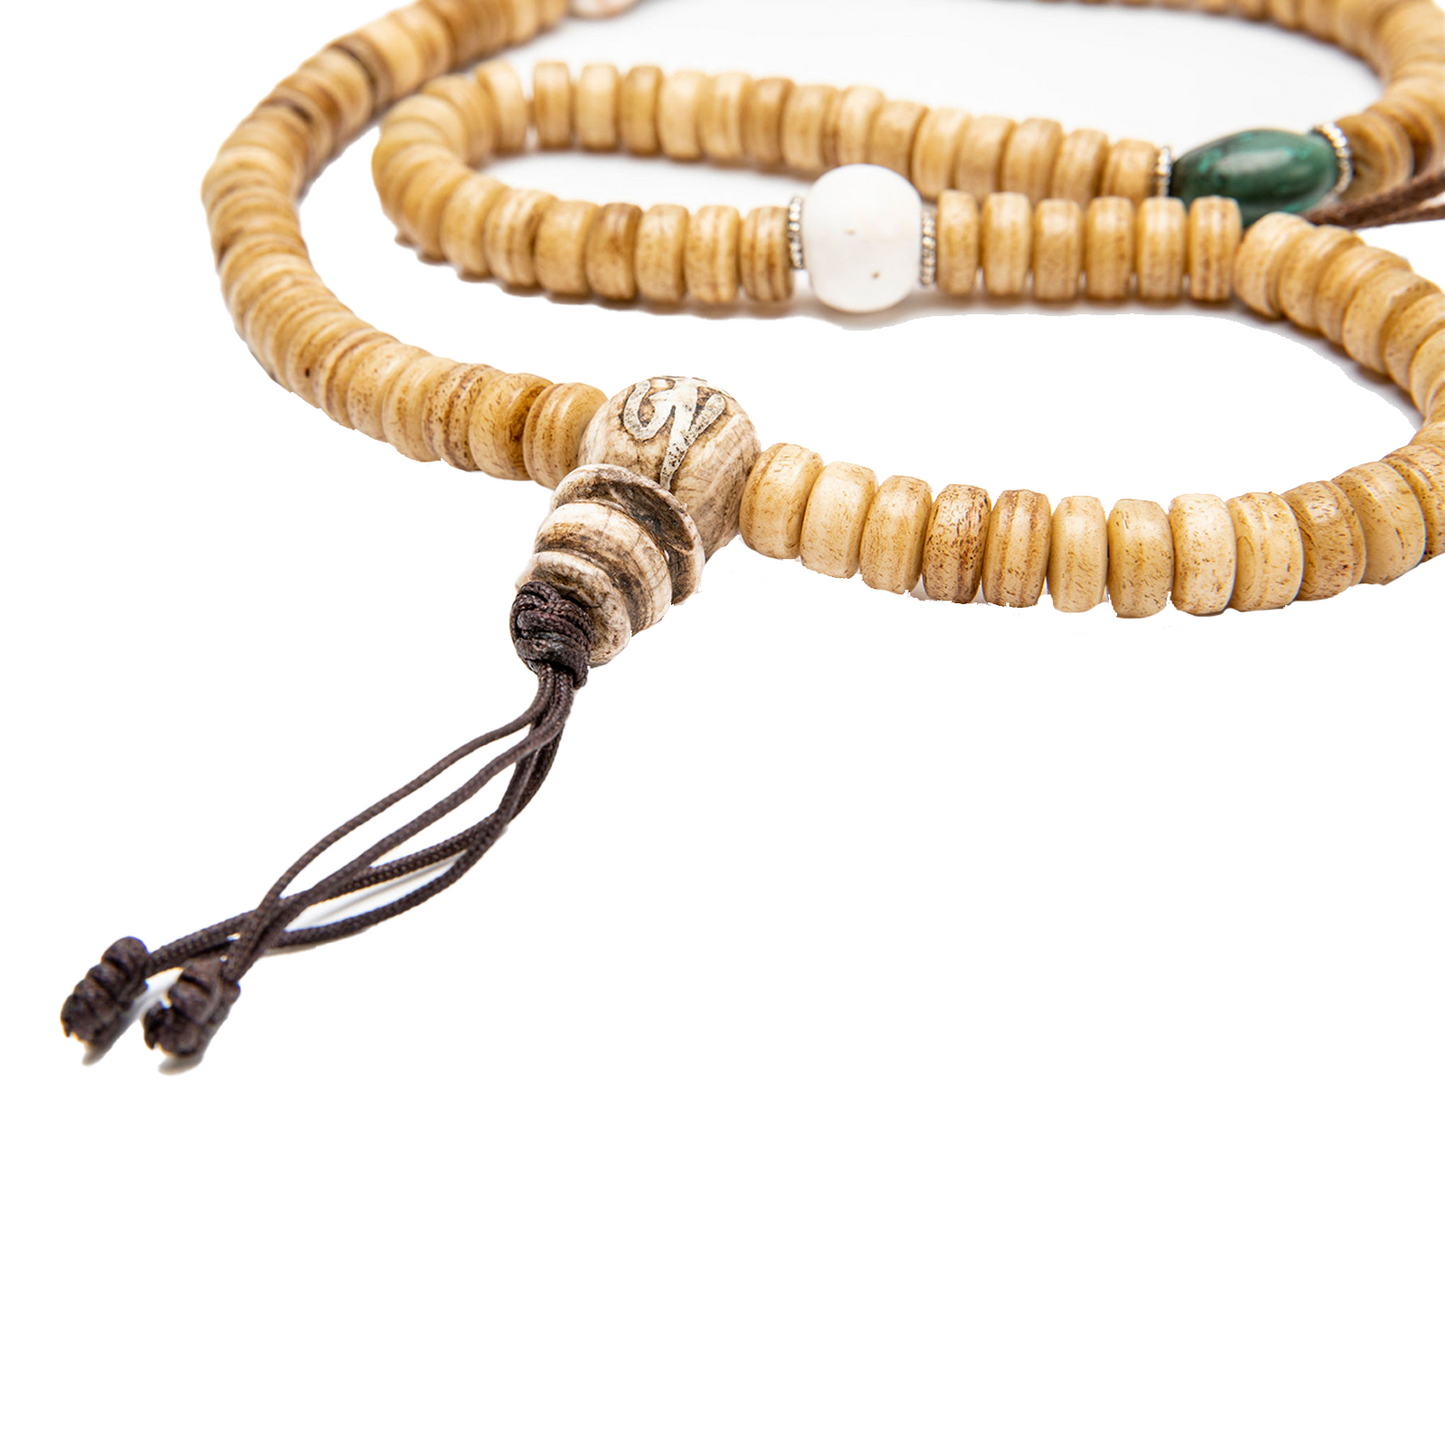 Close-up of the guru bead and knot of the Yak Bone Disc-Shaped Mala against a solid white backdrop.